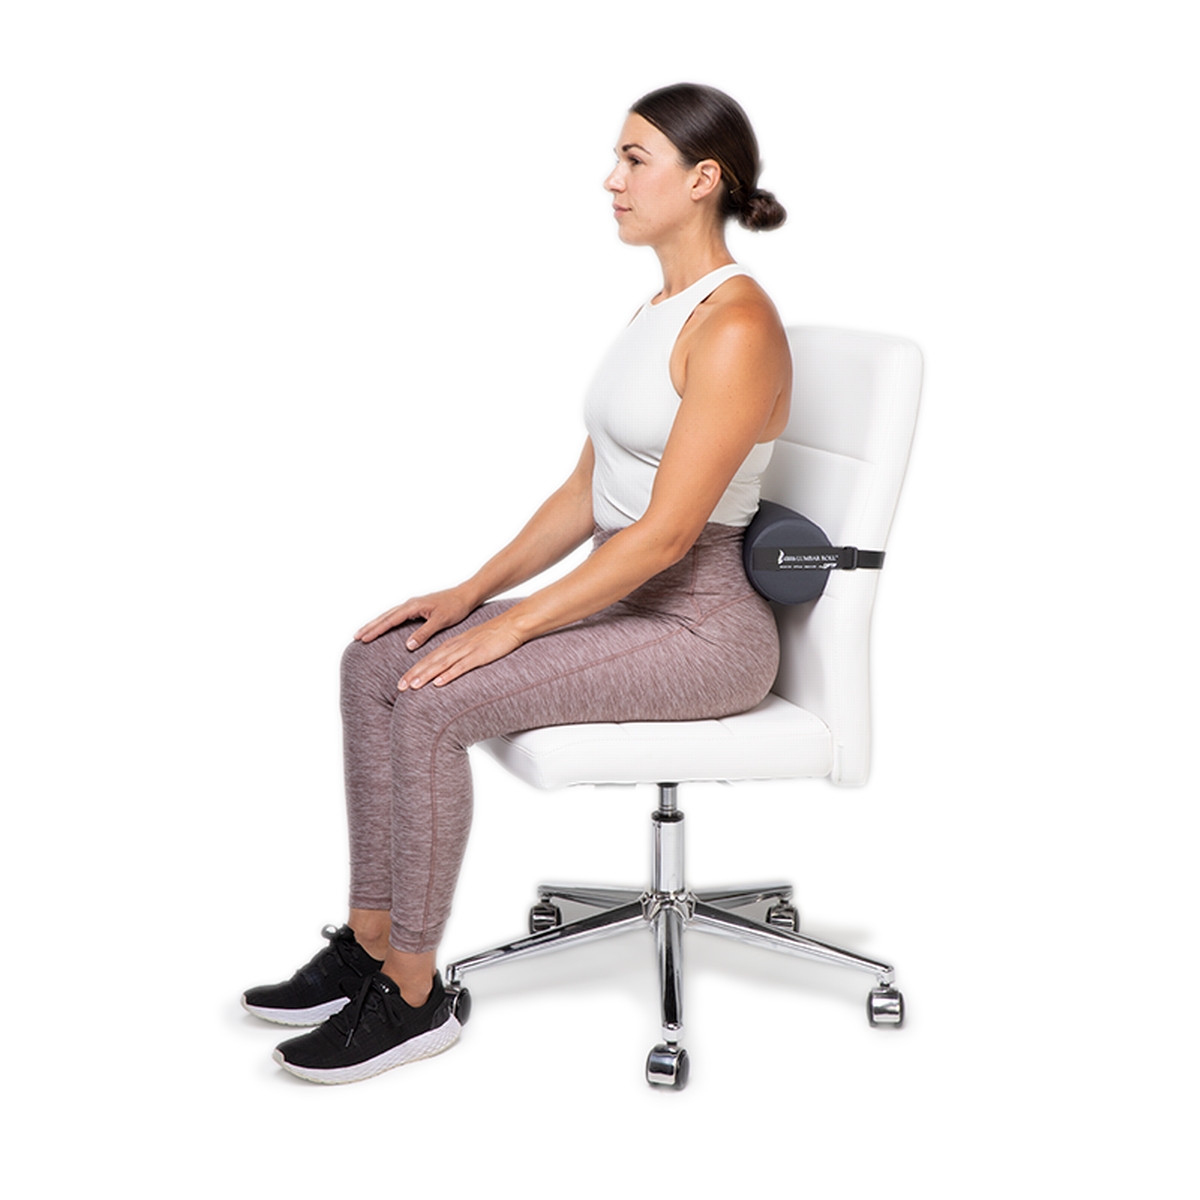 The Original McKenzie Lumbar Roll Memory Cotton Waist Back Pillow Support  for Office Chairs and Car Seats